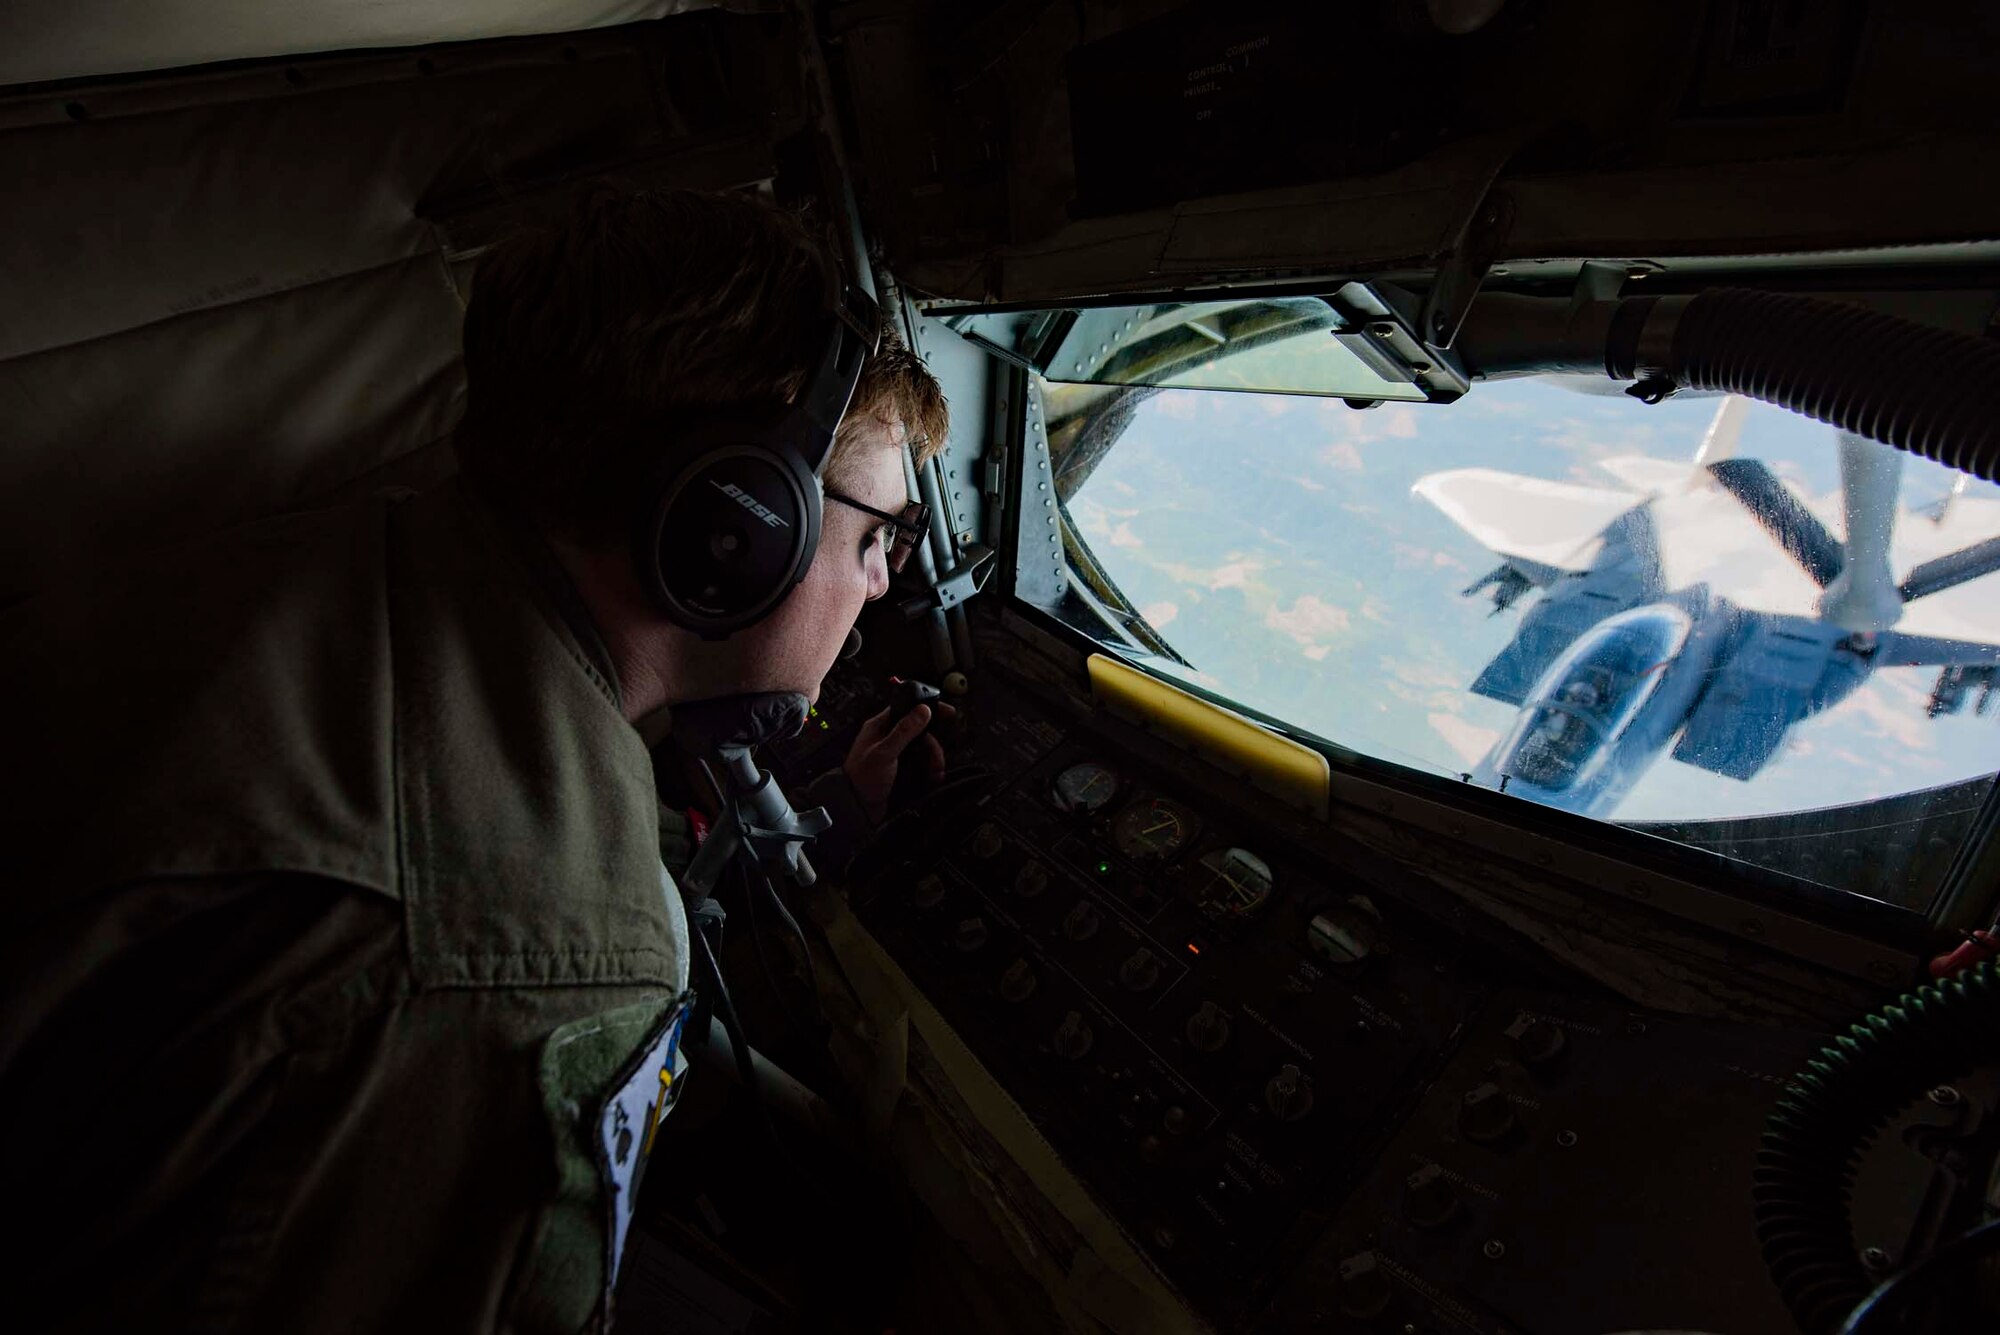 Staff Sgt. Chas Cramer, a boom operator with the 116th Air Refueling Squadron, transfers fuel to an F-15A Eagle from the 142nd Fighter Wing during Aerospace Control Alert CrossTell training exercise July 24, 2018 over western Oregon. CrossTell is a three-day exercise involving multiple Air National Guard units, the Civil Air Patrol, and U.S. Coast Guard rotary-wing air intercept units to conduct training scenarios to replicate airborne intercepts designed to safely escort violators out of restricted airspace. (U.S. Air National Guard photo by Staff Sgt. Rose M. Lust)